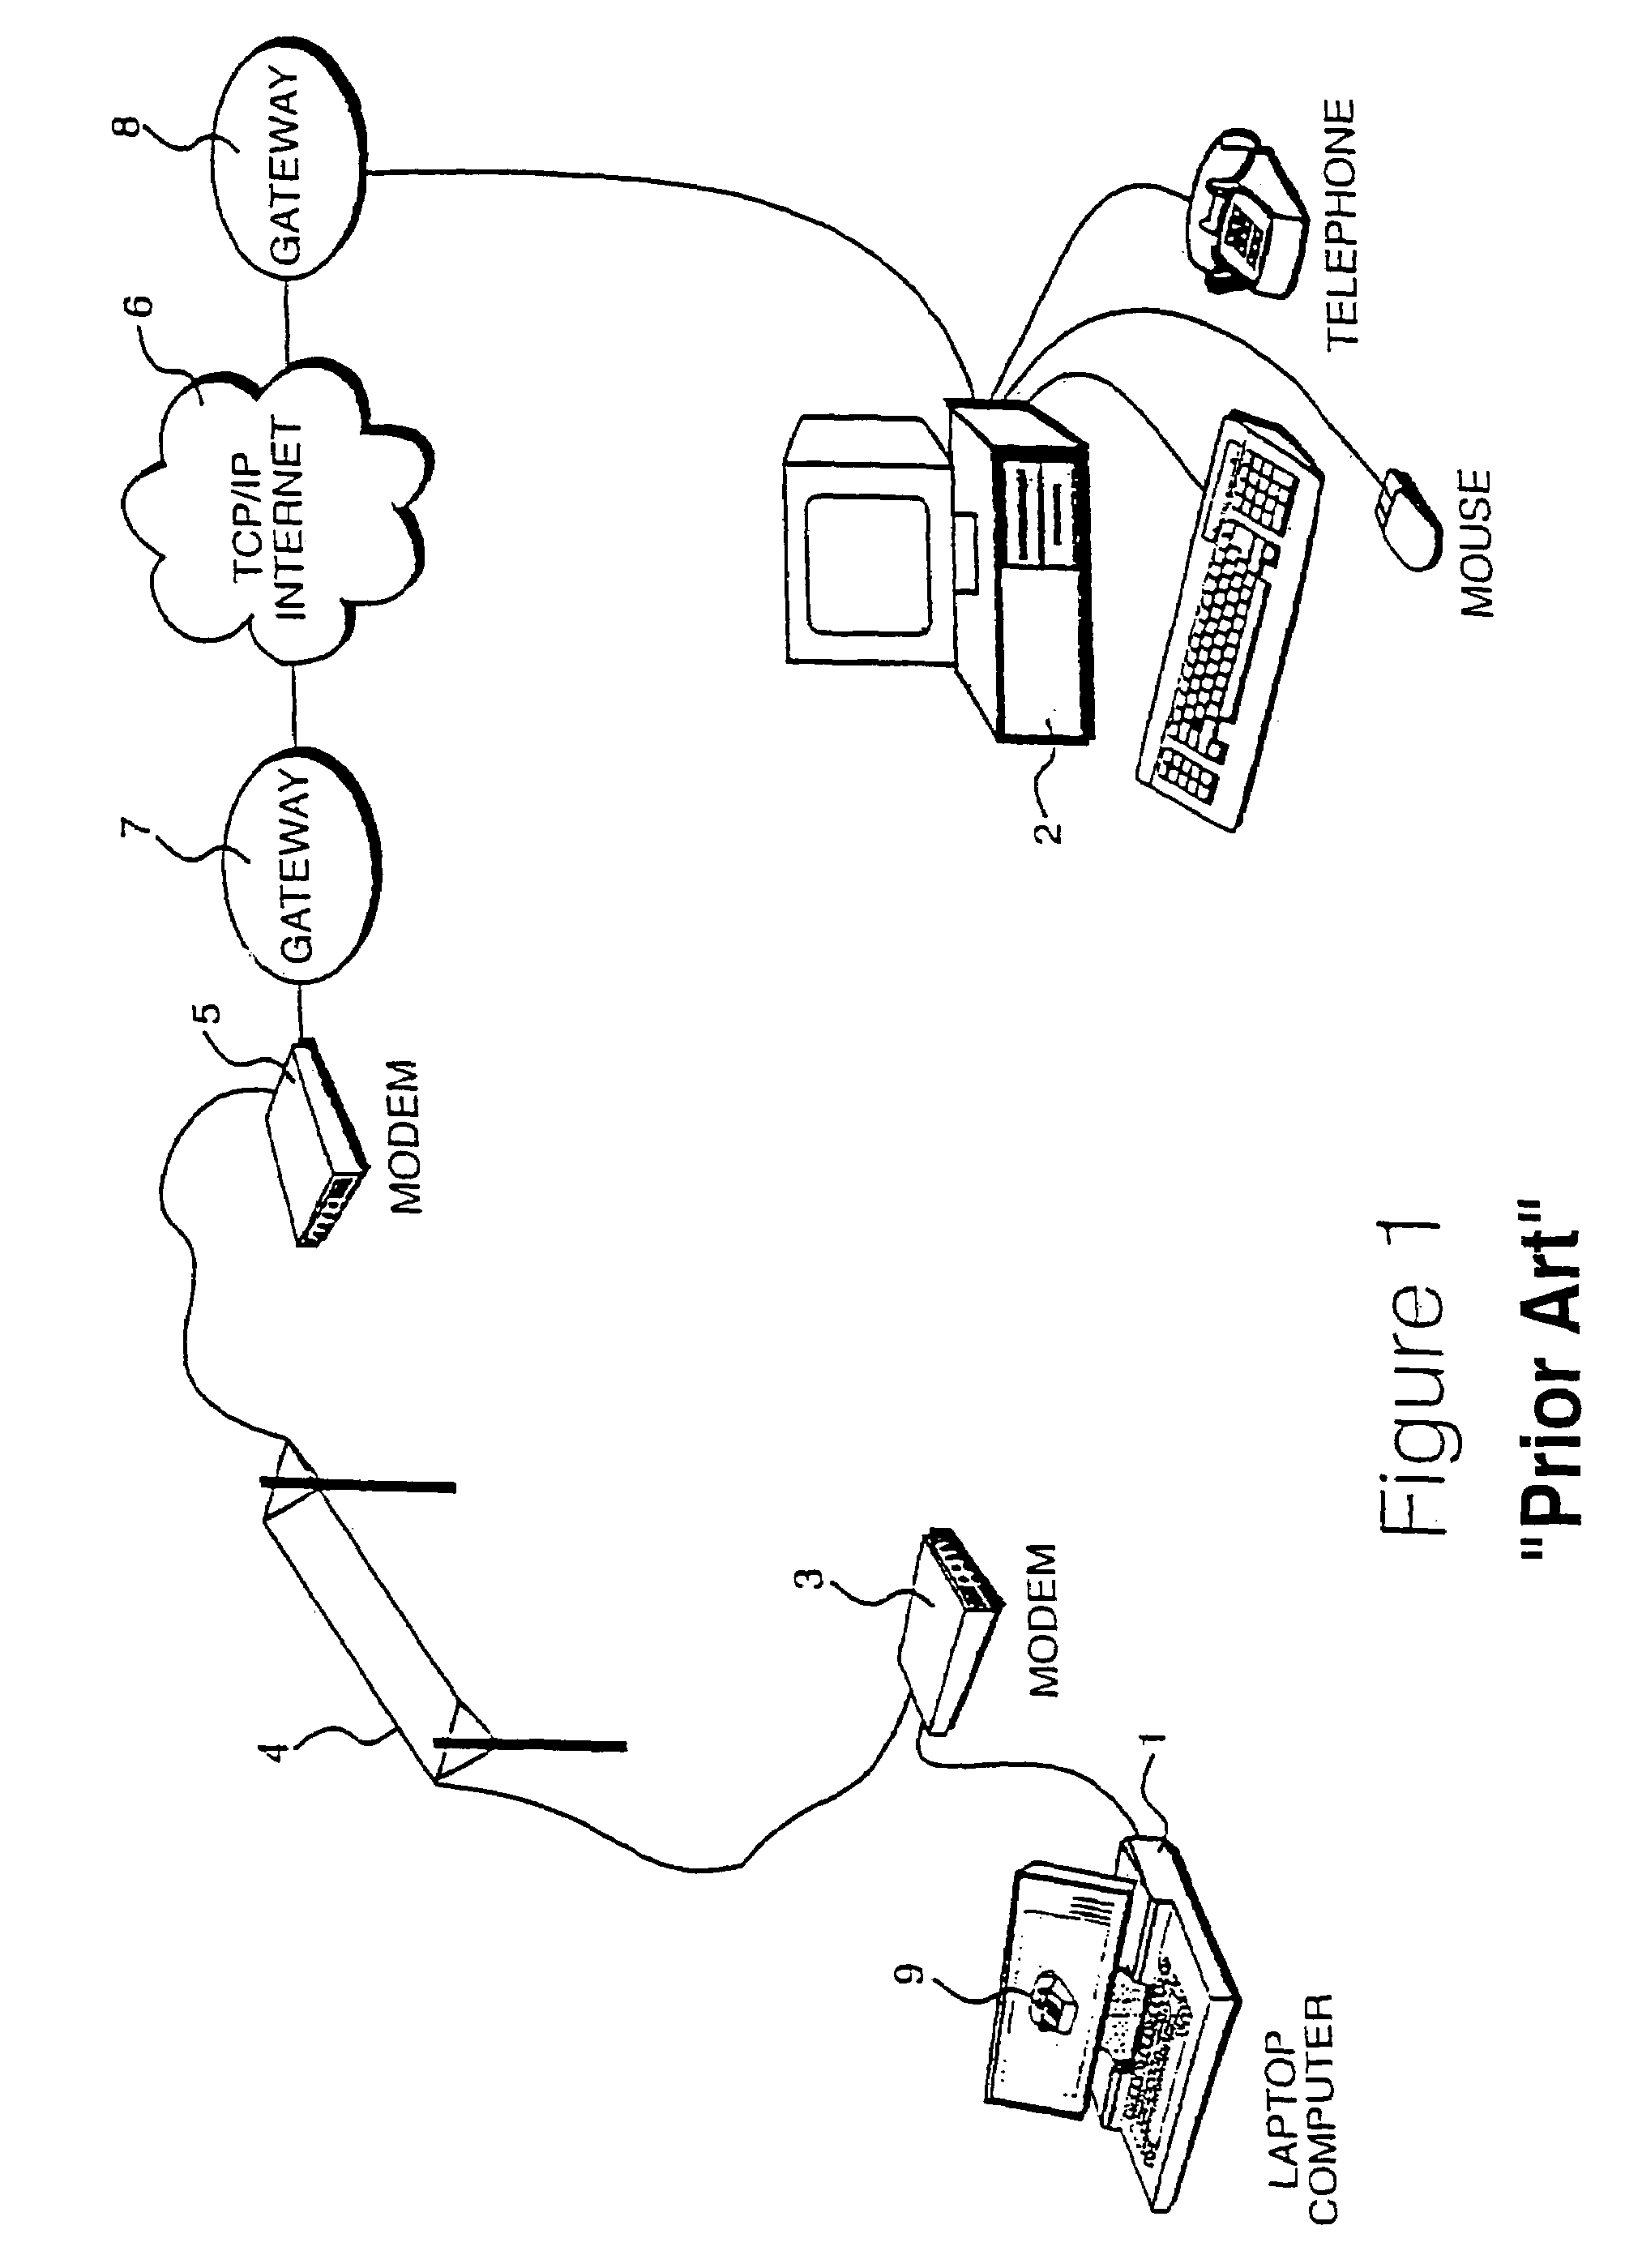 Processing device network